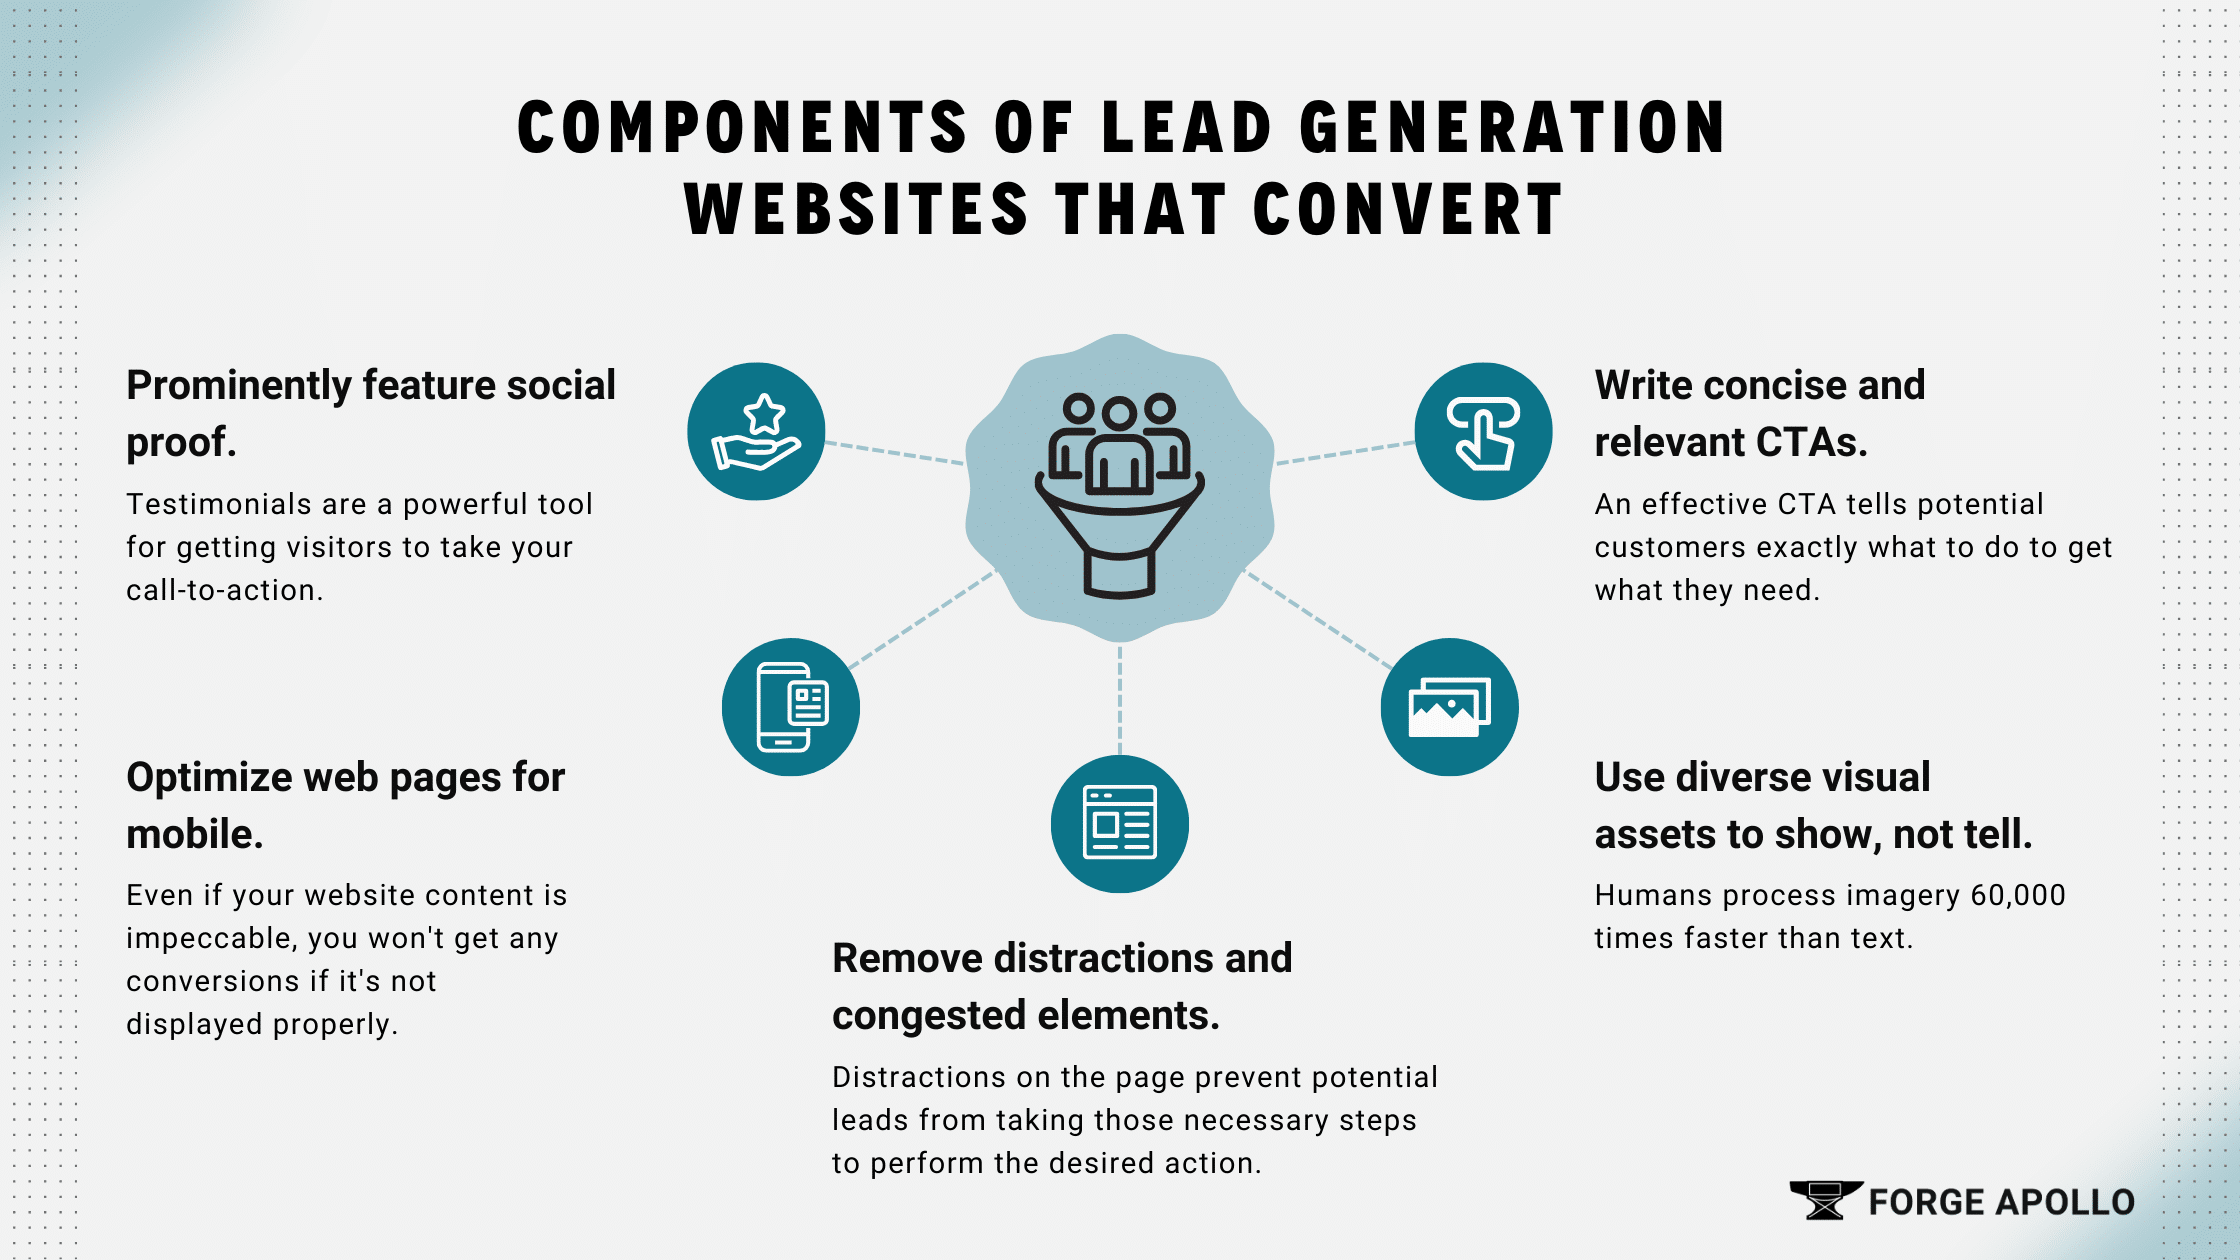 lead generation list of components social proof, mobile optimization, remove distractions, visual assets, concise ctas